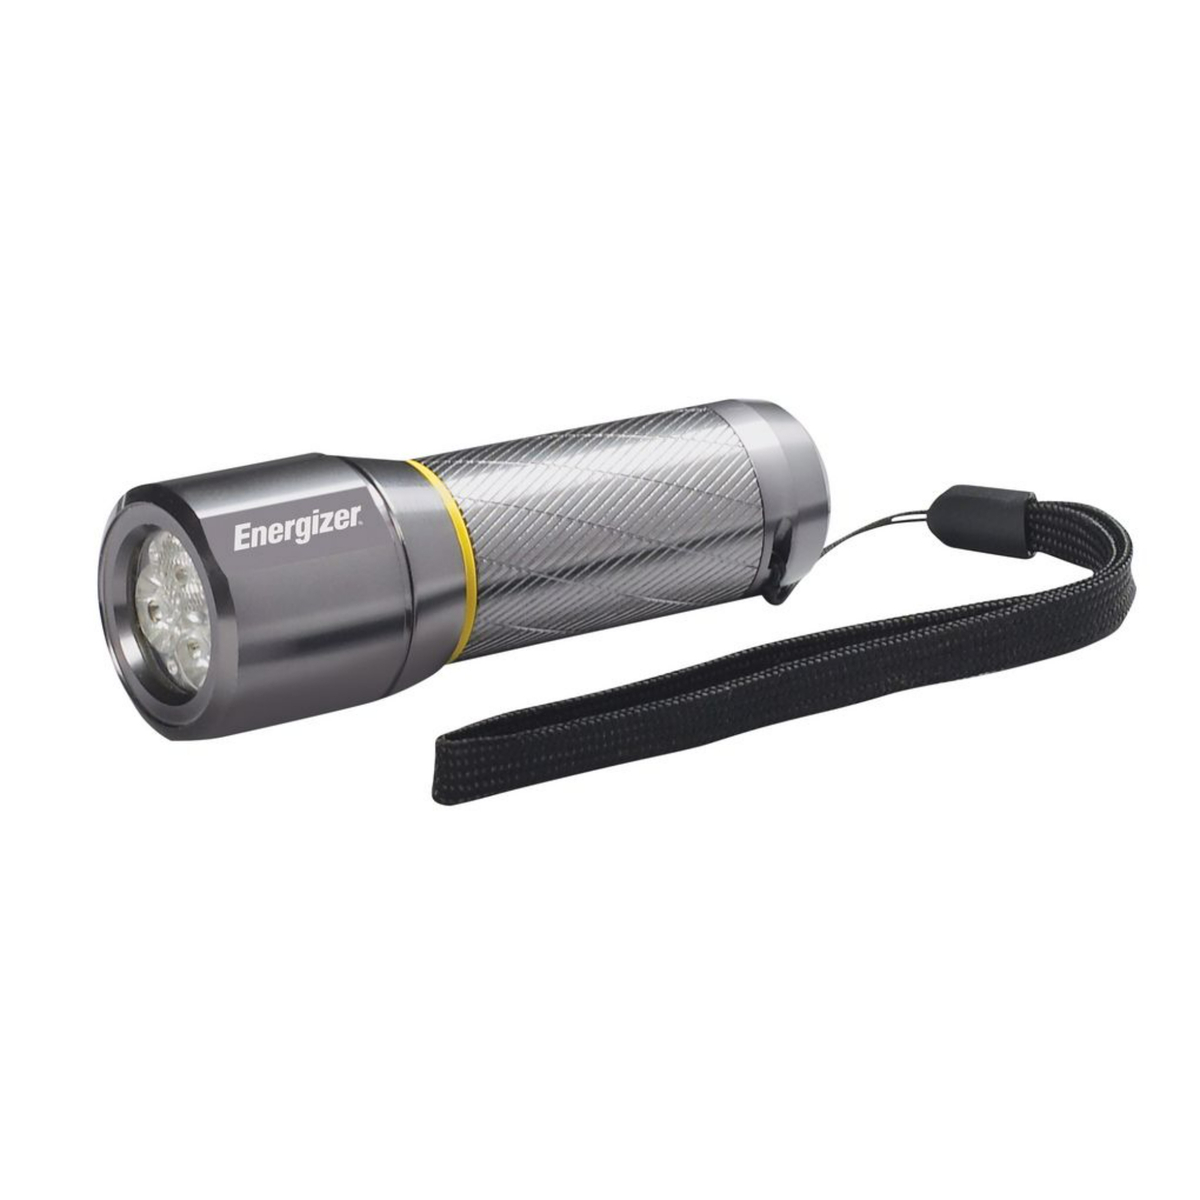 Energizer Vision HD 270 lumens LED Flash Light with 3 AAA Batteries, PMHH321